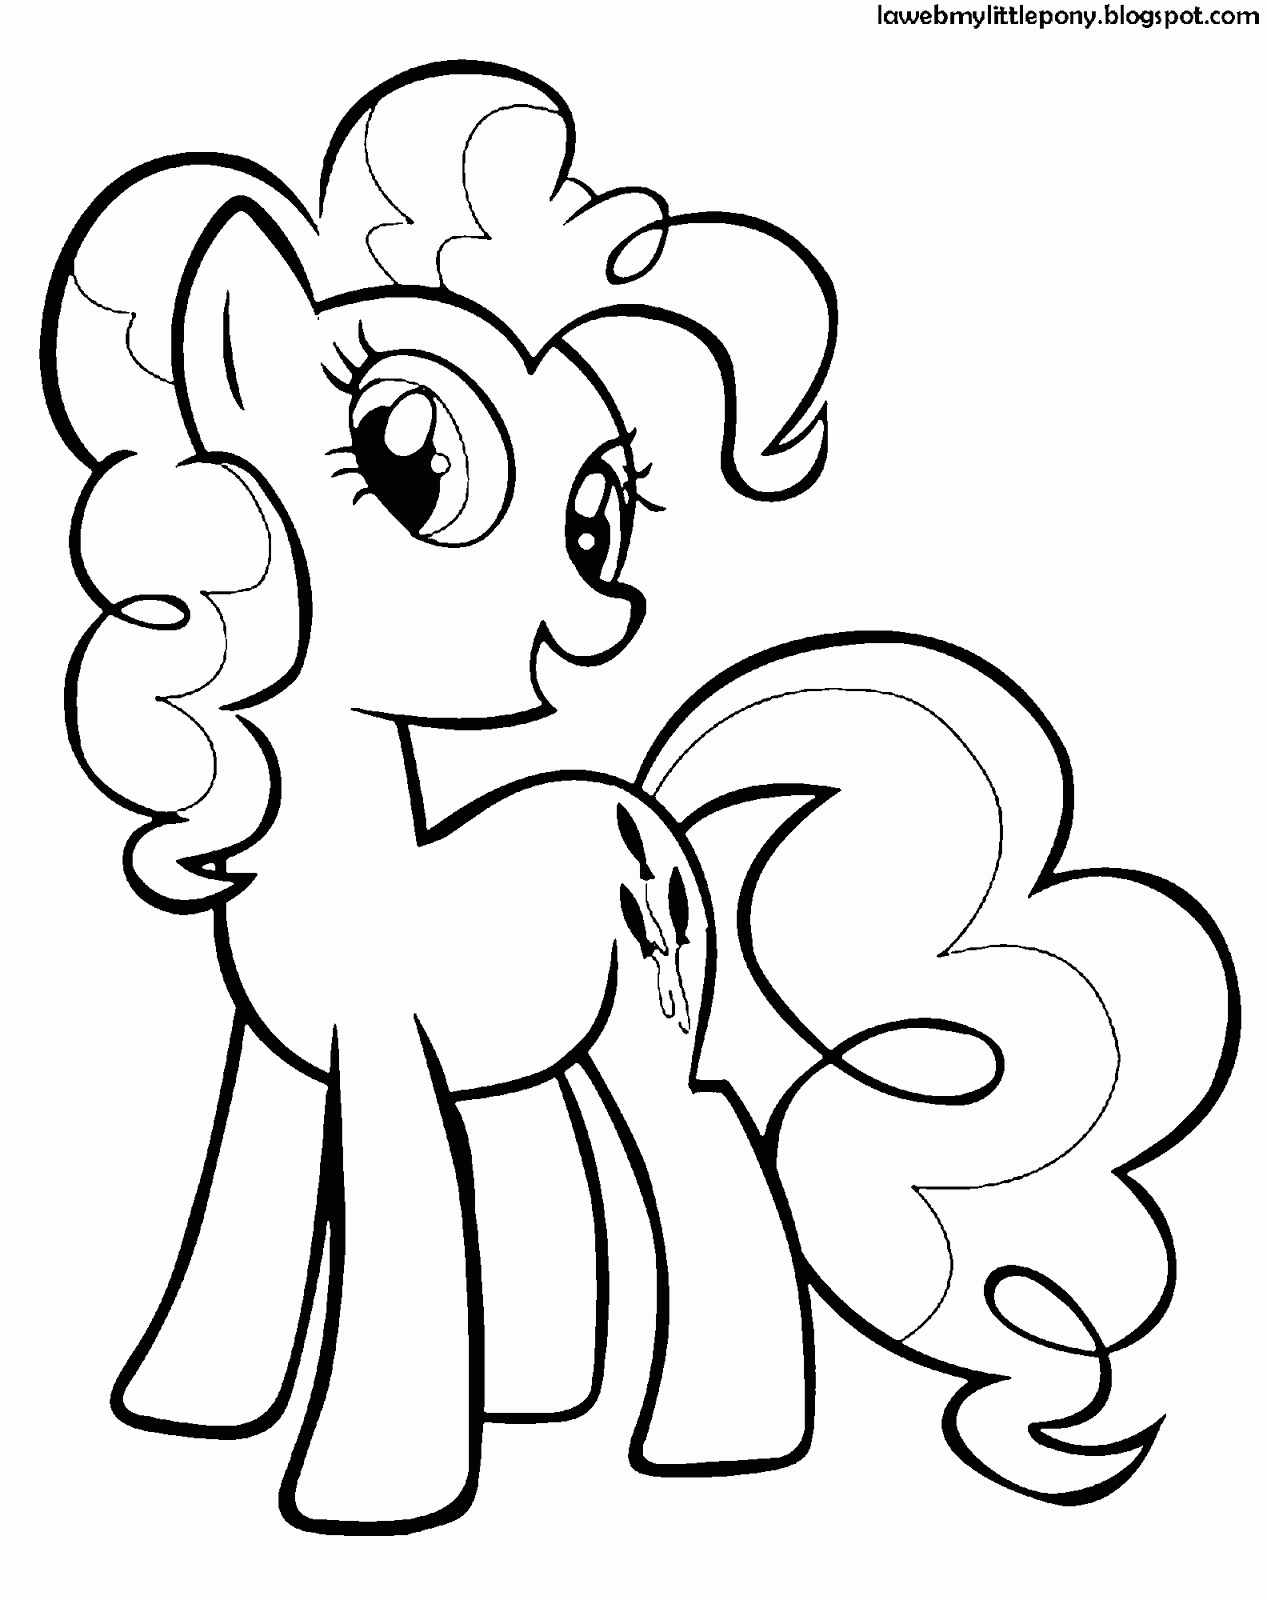 my little pony dibujos para colorear de pinkie pie de my on pinkie pie coloring page id=73838 /></p>
<p>my little pony dibujos para colorear de pinkie pie de my.</p>
<p>you can print or color them online at getdrawings com for absolutely free for sure her body starting from head to toe is wholly pink the adventure begins when the princess gives twilight the task of learning about friendship and sends her to spike a baby dragon in ponyville.</p>
<p> <img loading=